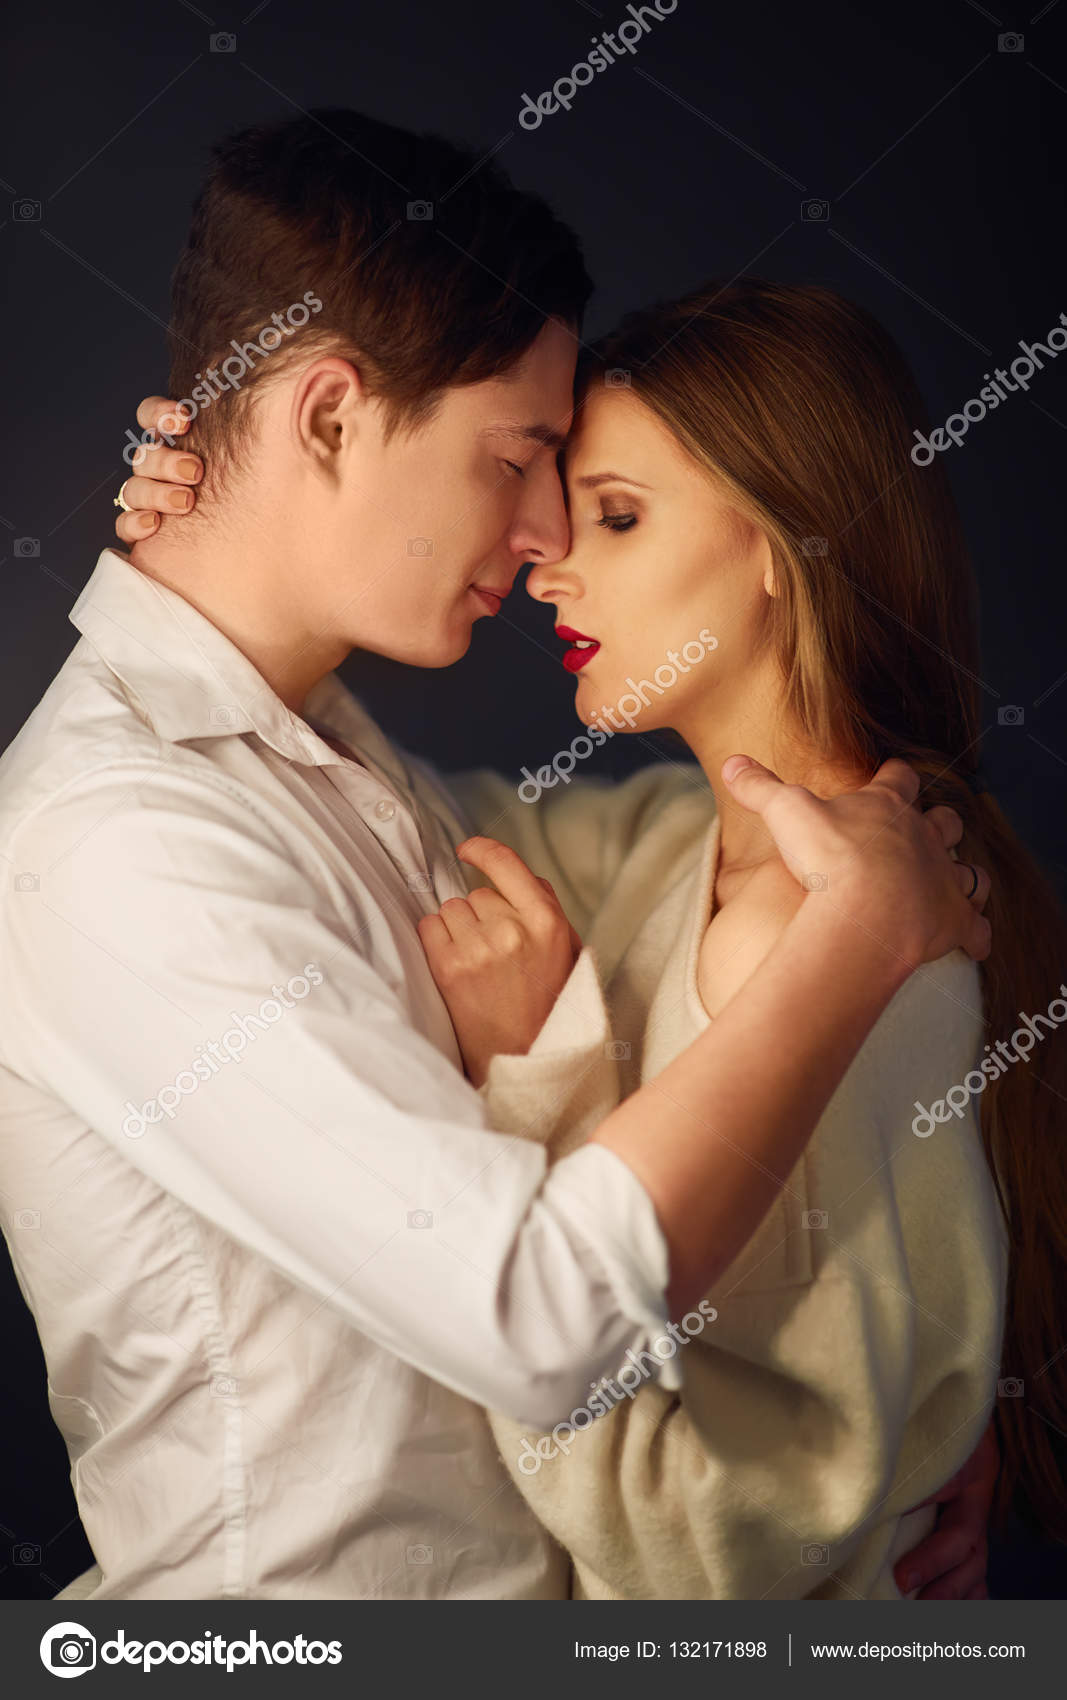 AVAKIN KISSING POSE IDEAS : r/AvakinOfficial